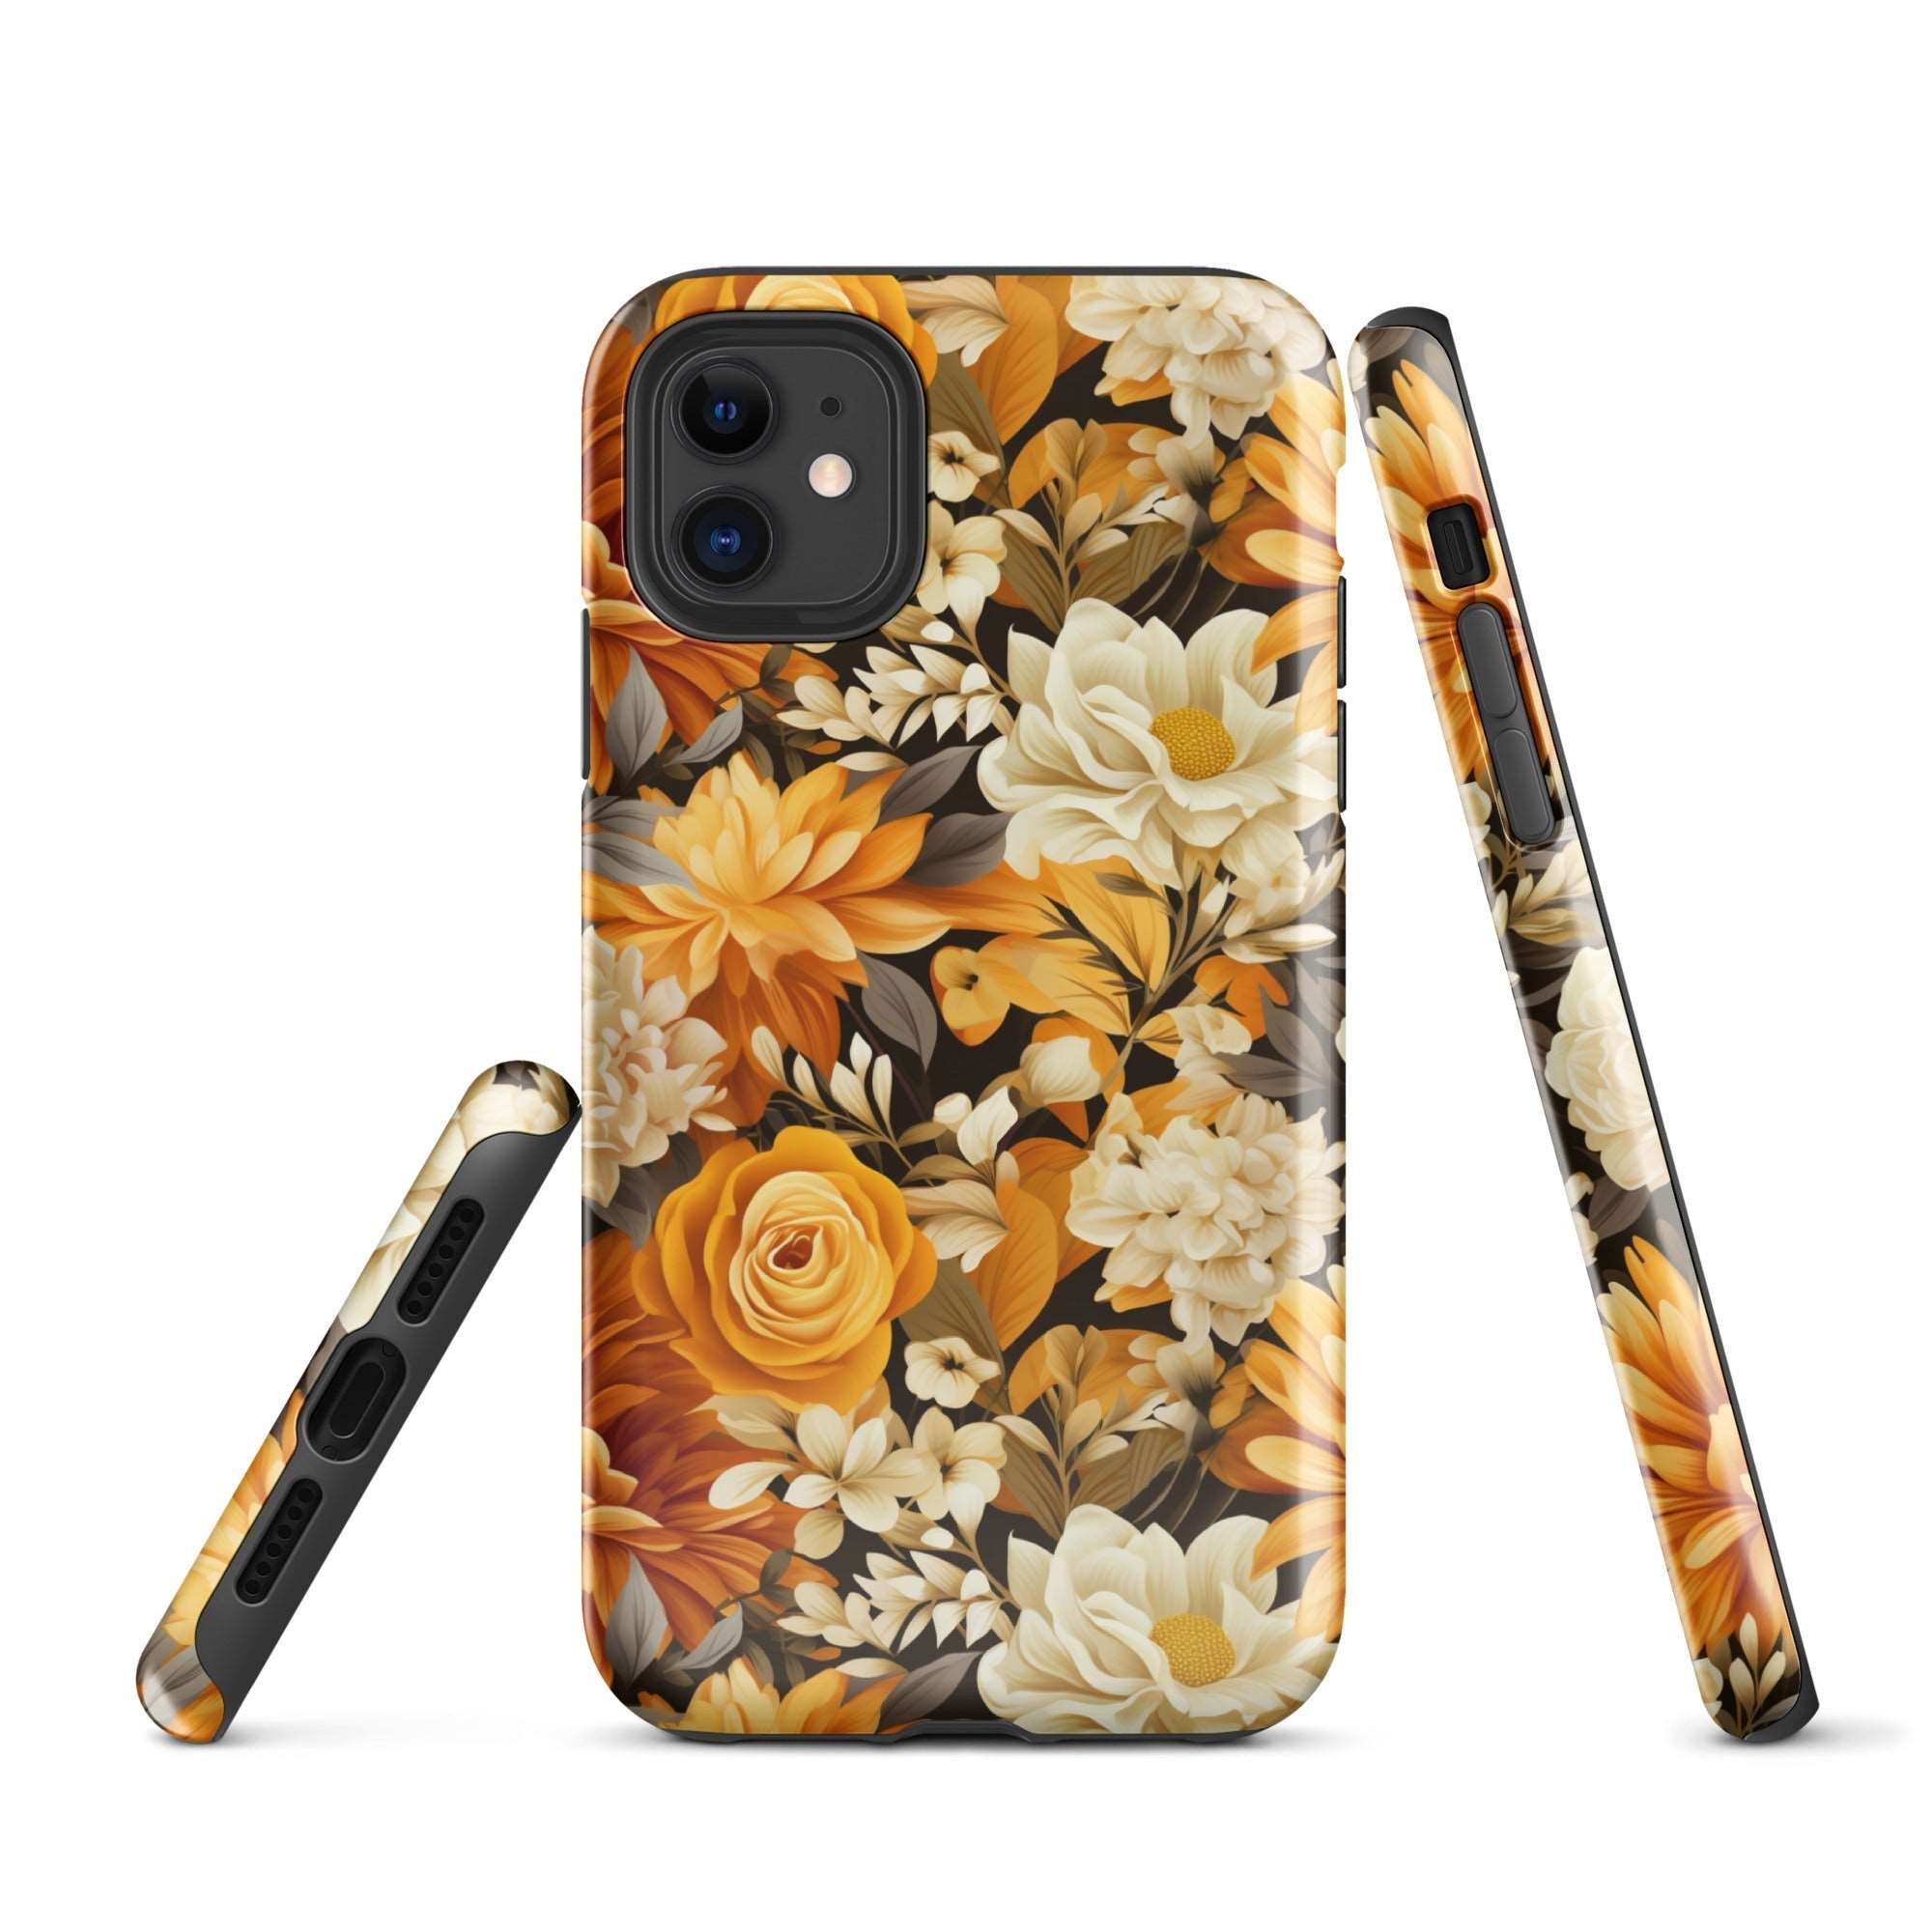 Autumnal Romance - Golden and White Blossoms on Black - iPhone Case - Pattern Symphony